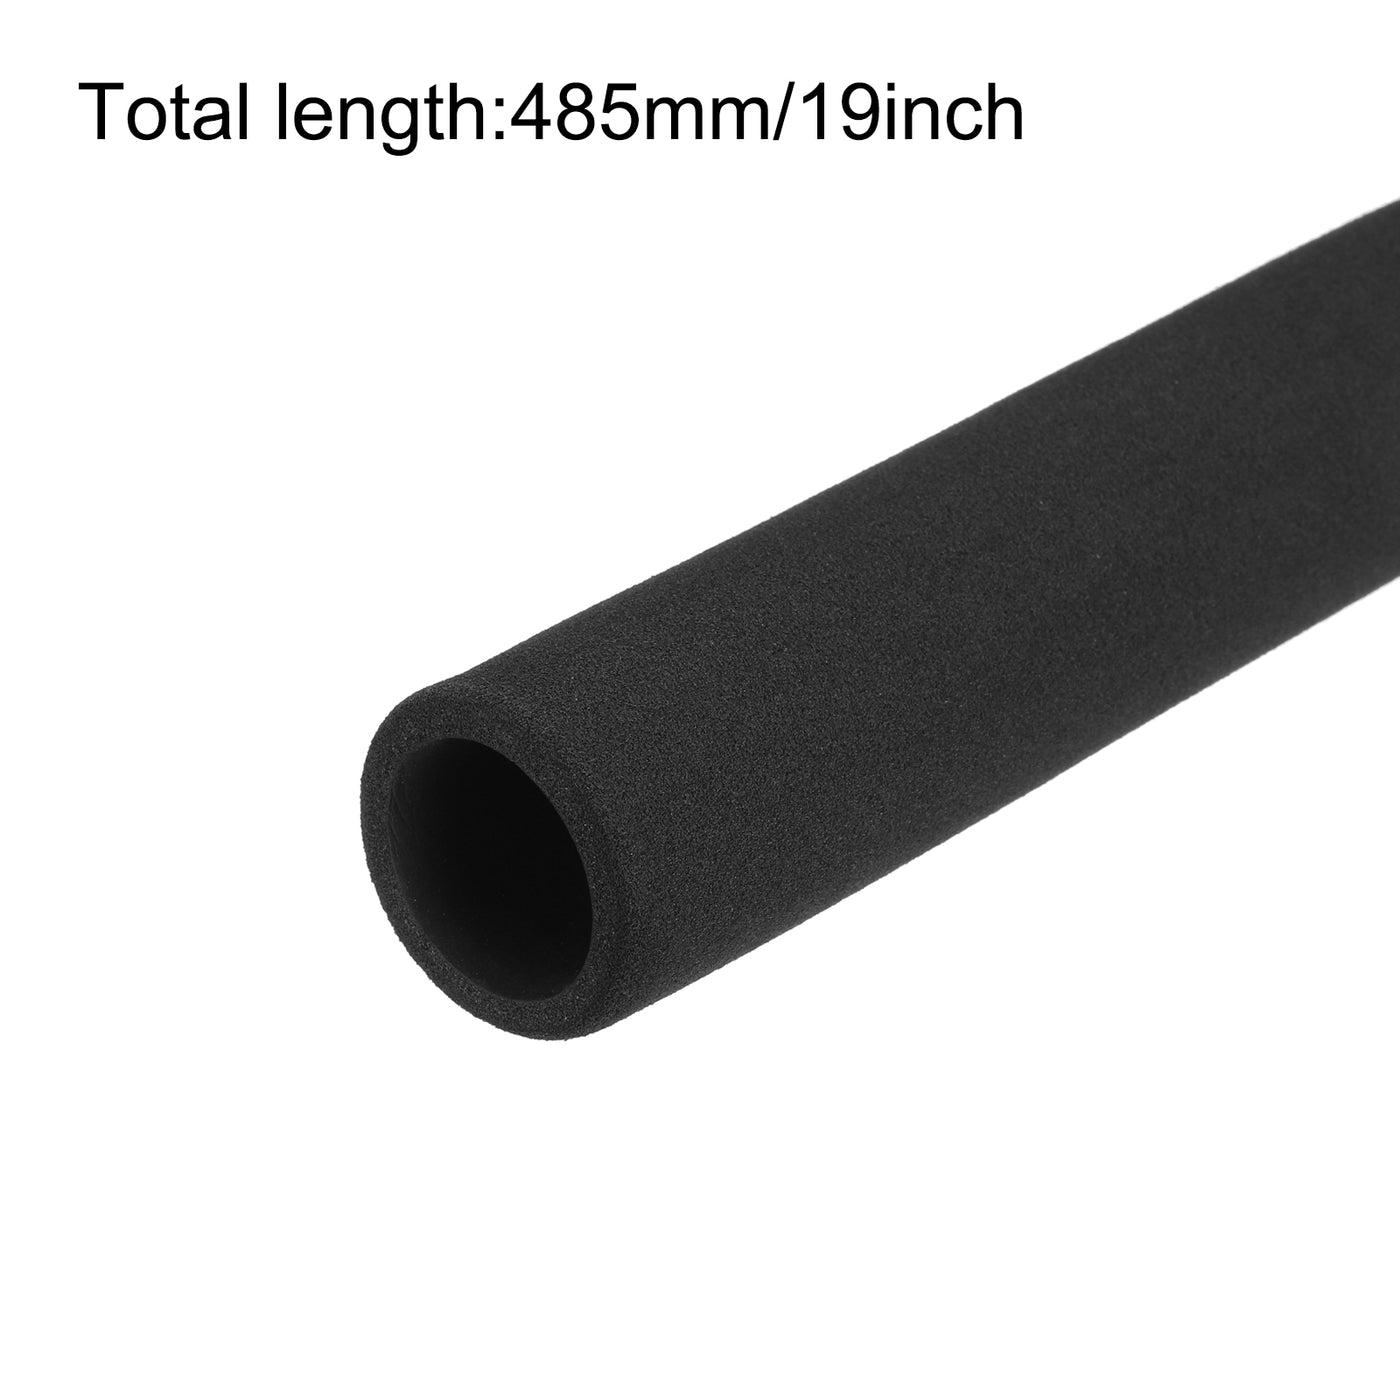 uxcell Uxcell Pipe Insulation Tube Foam Tubing for Handle Grip Support 24mm ID 34mm OD 485mm Heat Preservation Black